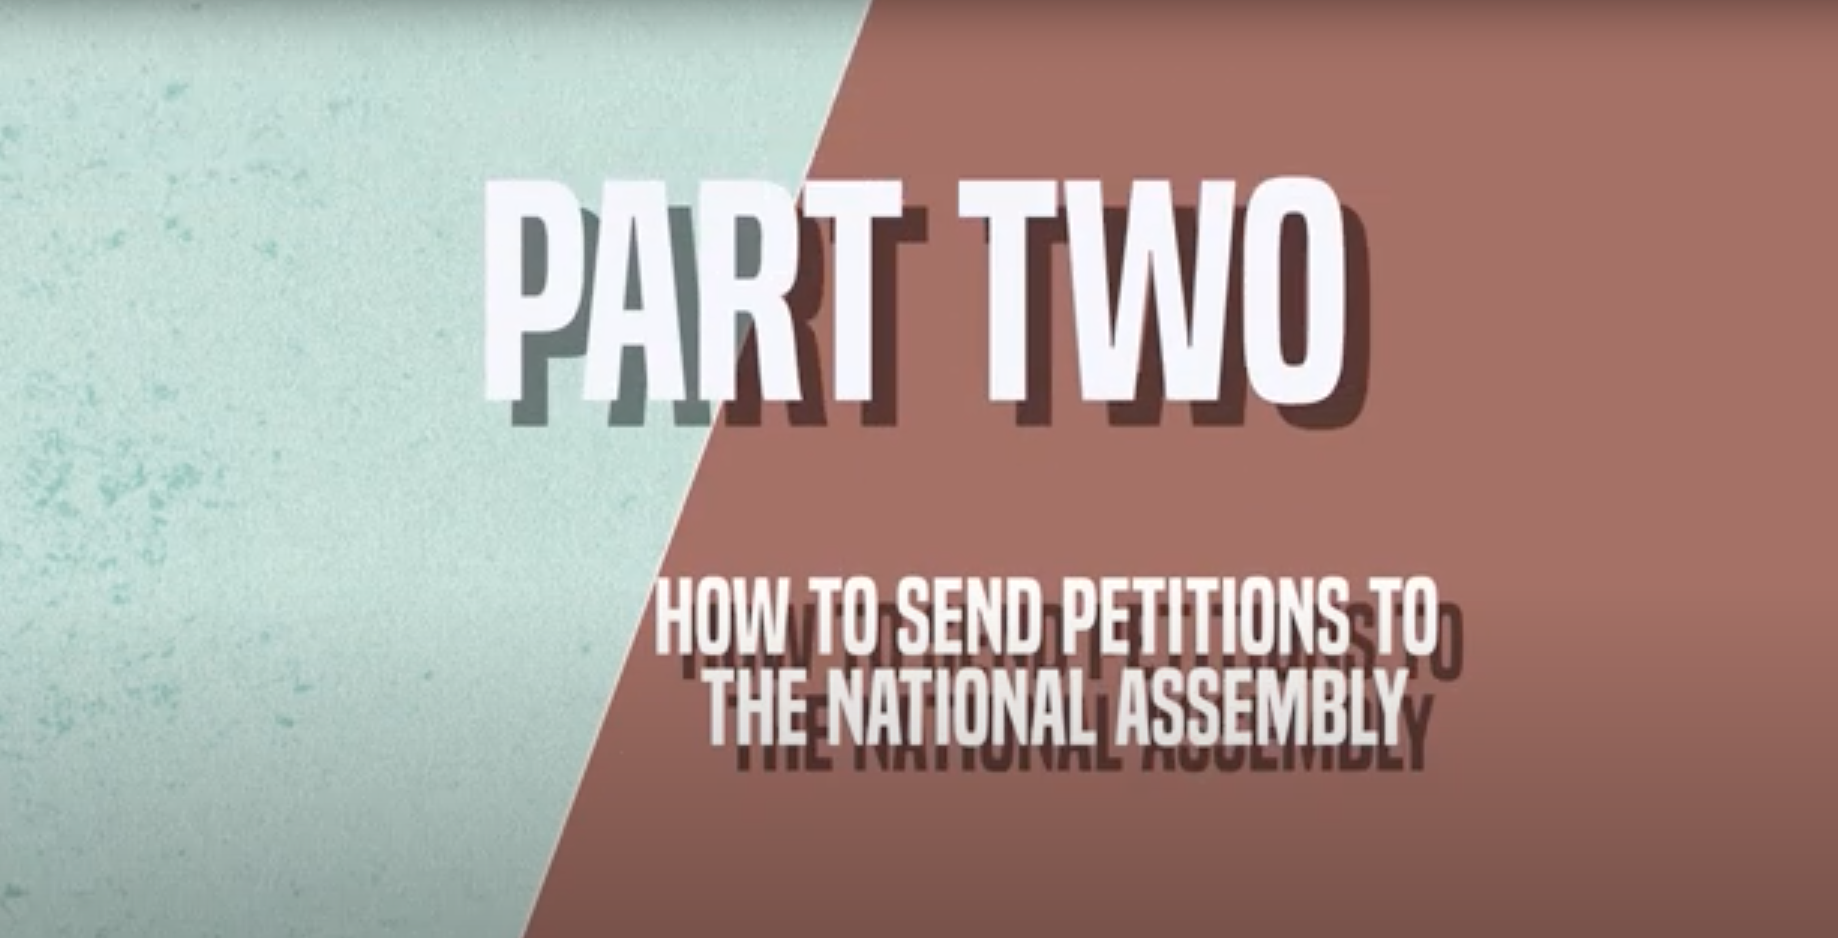 How To Send Petitions To The National Assembly